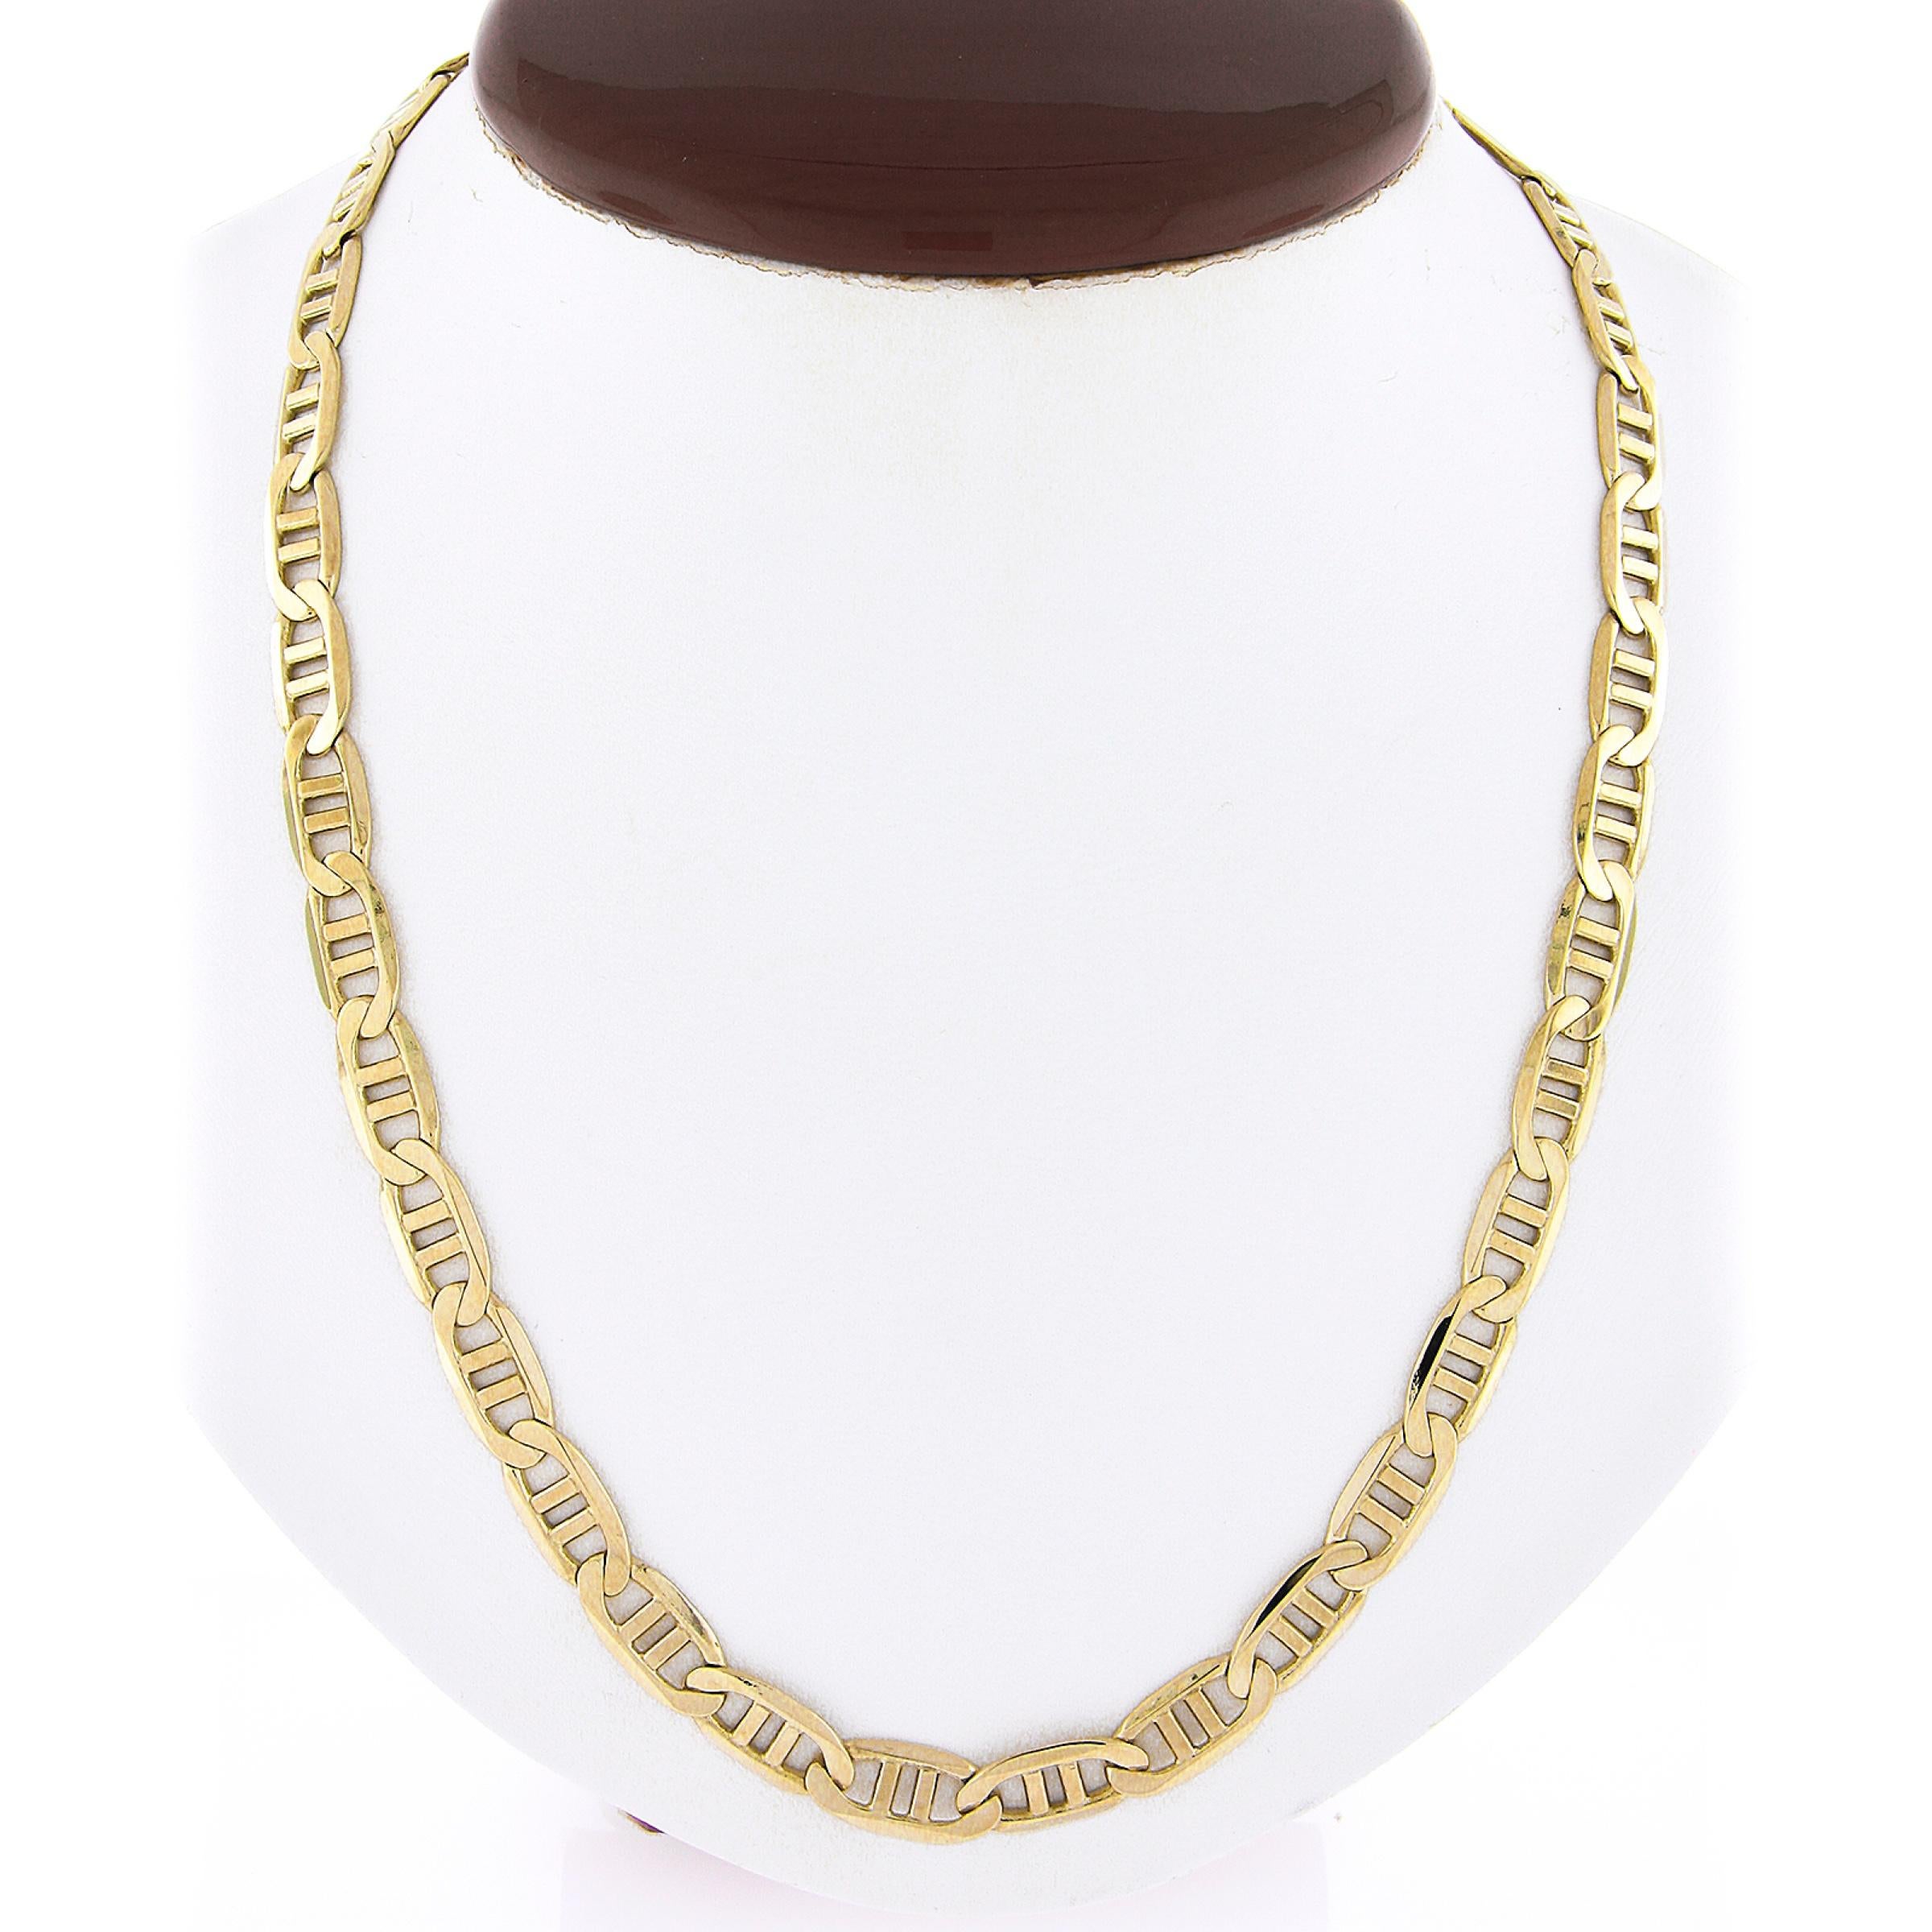 Here we have and Italian very well made men's/unsiex flat Gucci/mariner link chain necklace that was crafted in from solid 14k yellow gold. The open links have a wonderful high-polished finish throughout granting a super attractive, shiny, and bold